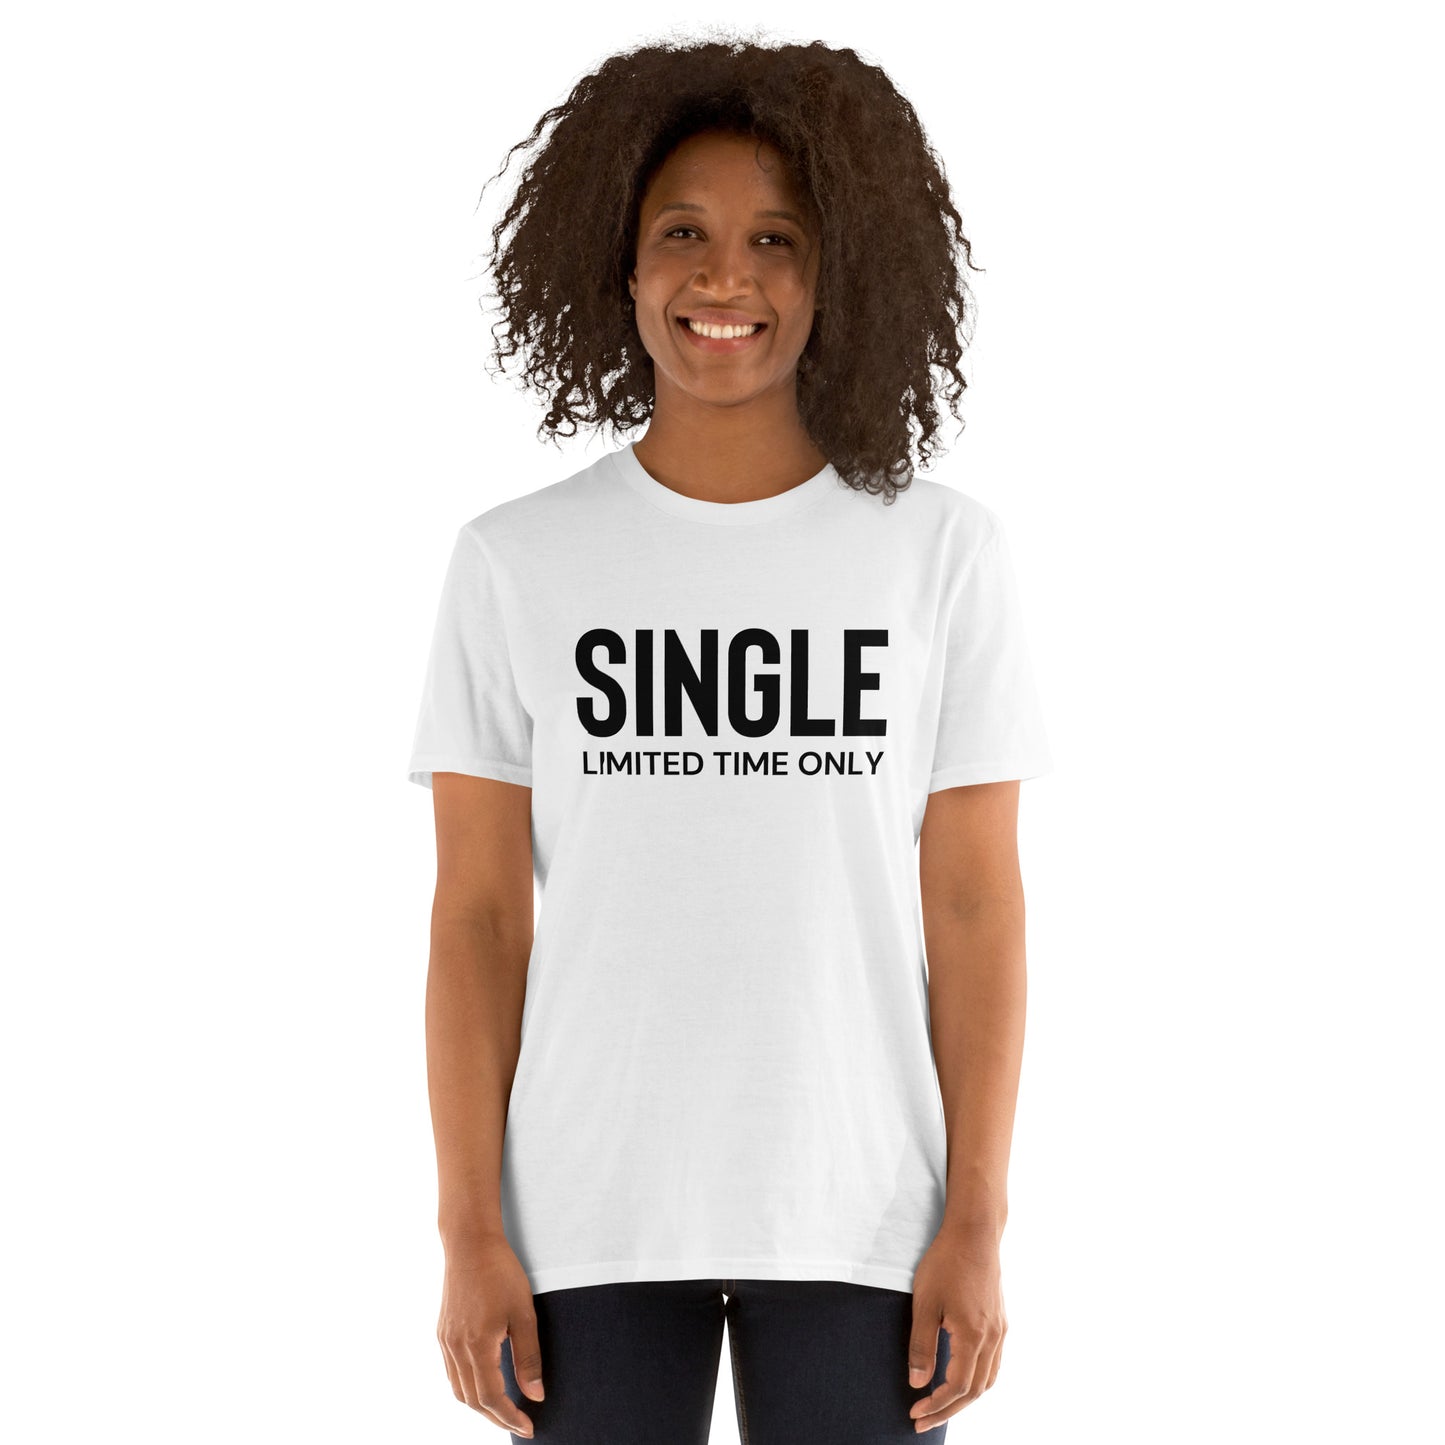 Single Limited Time Only: Relationship Status Light T-Shirt